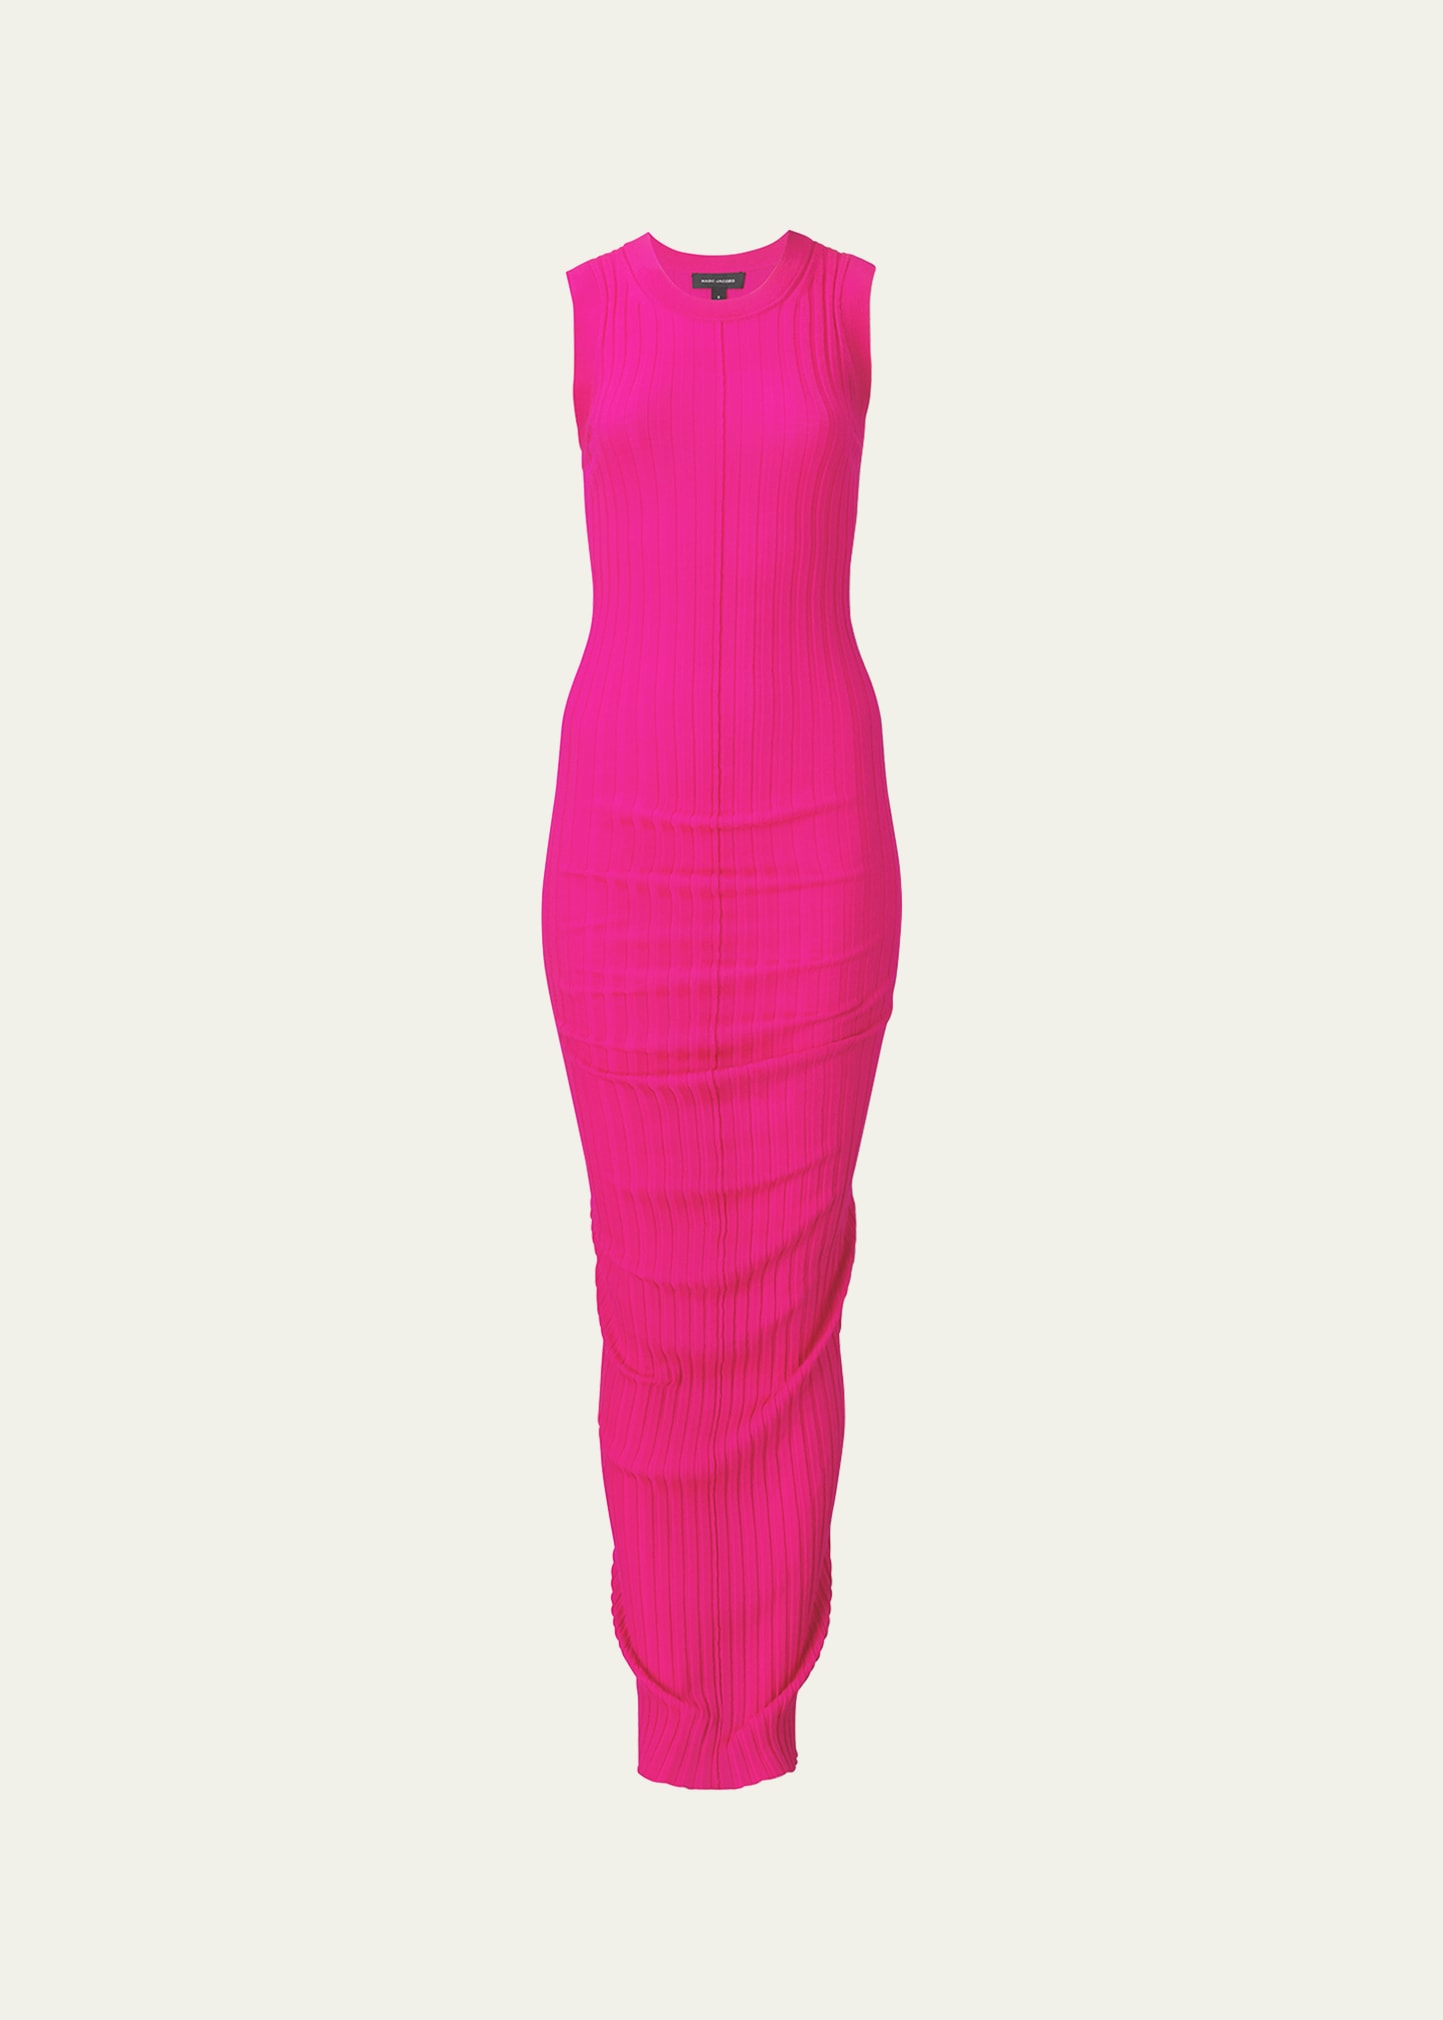 MARC JACOBS RIBBED WOOL TWISTED BODY-CON DRESS